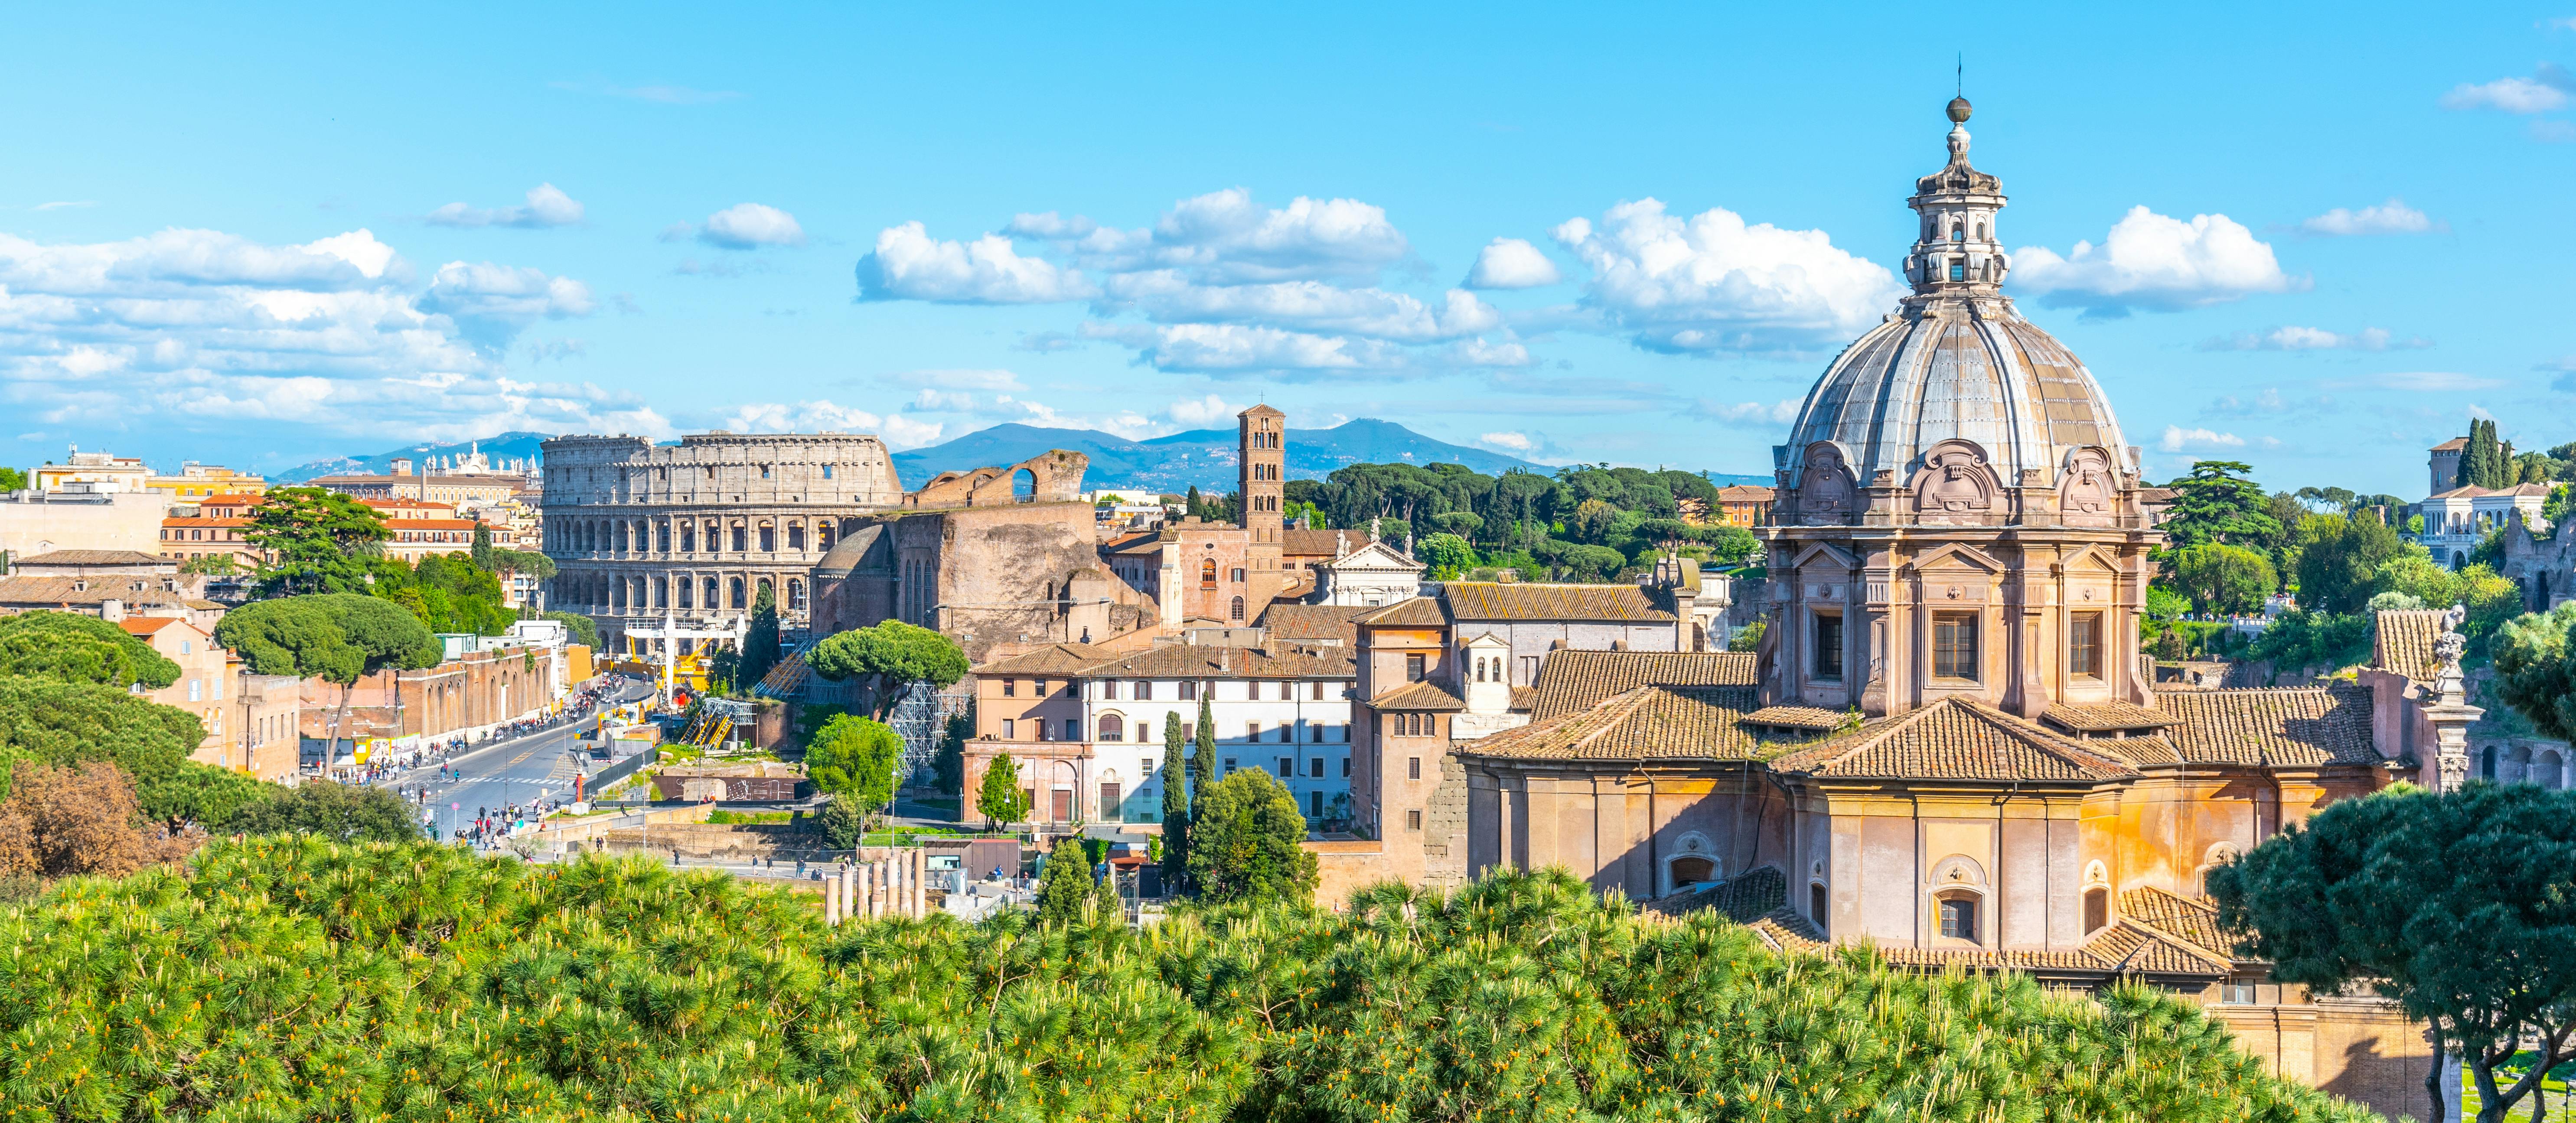 Rome immersive self-guided audio walking tour package